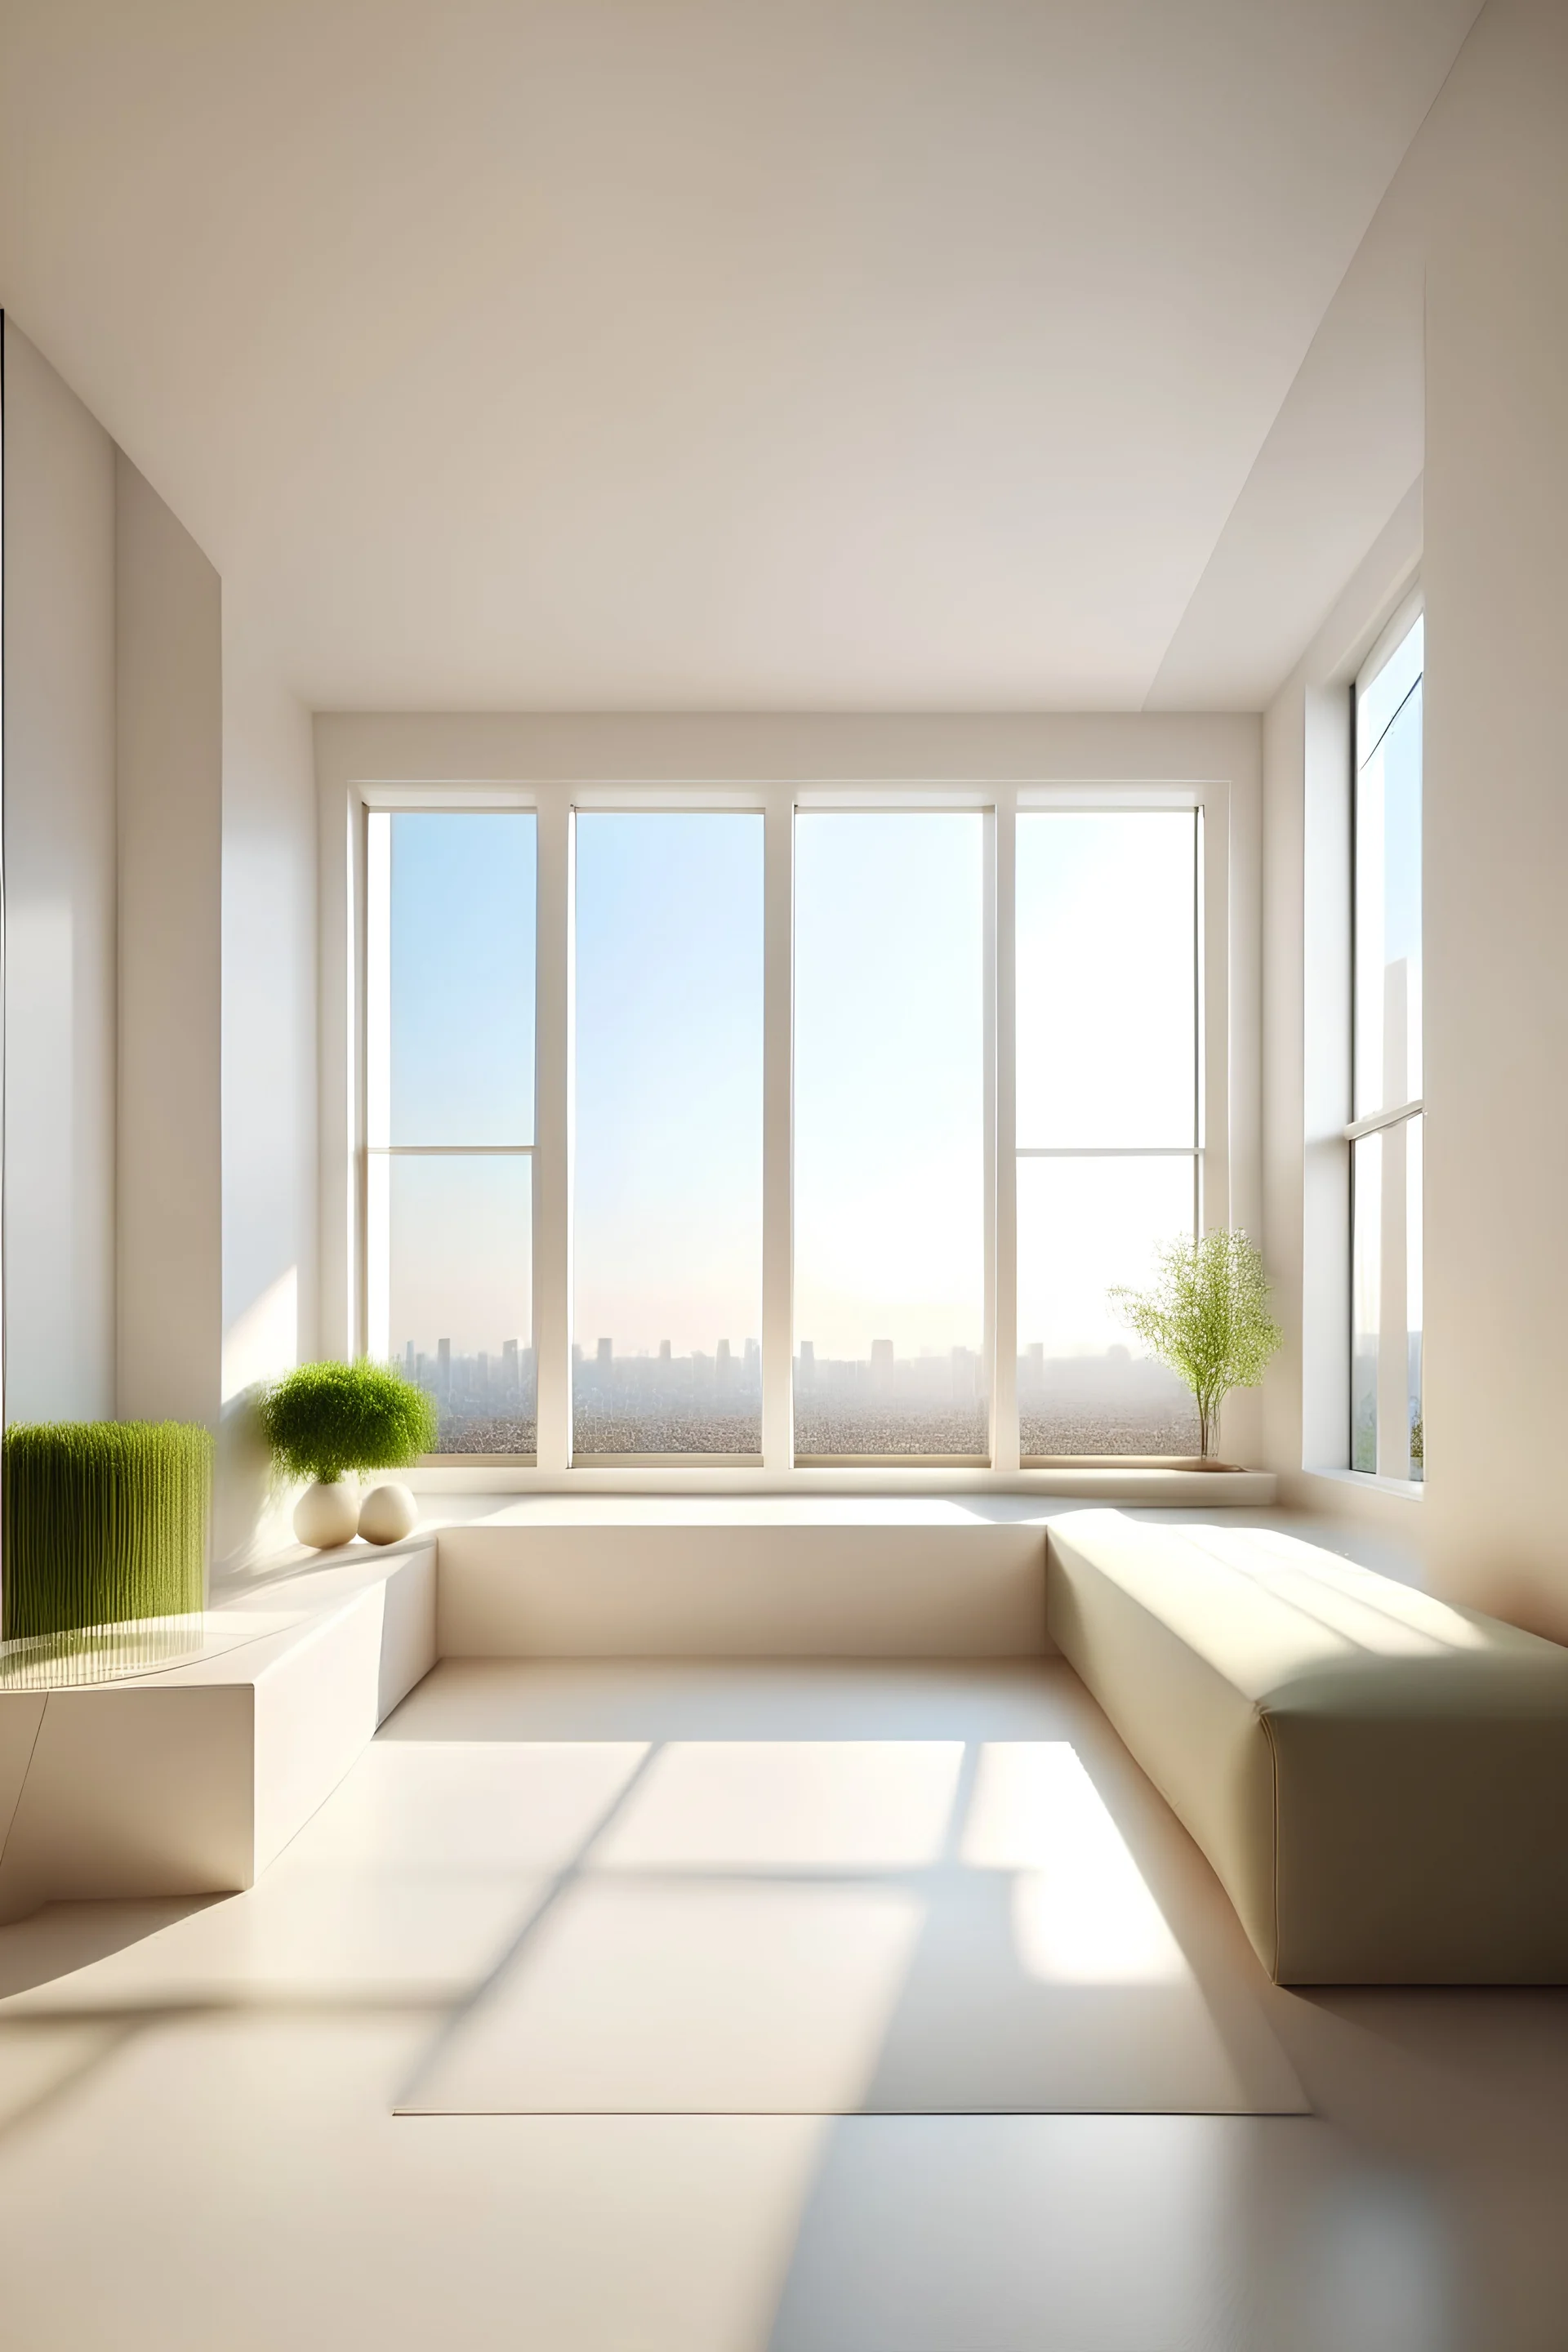 bright joga place with the view, colors on the picture agre beige and white, fancy, minimalistic